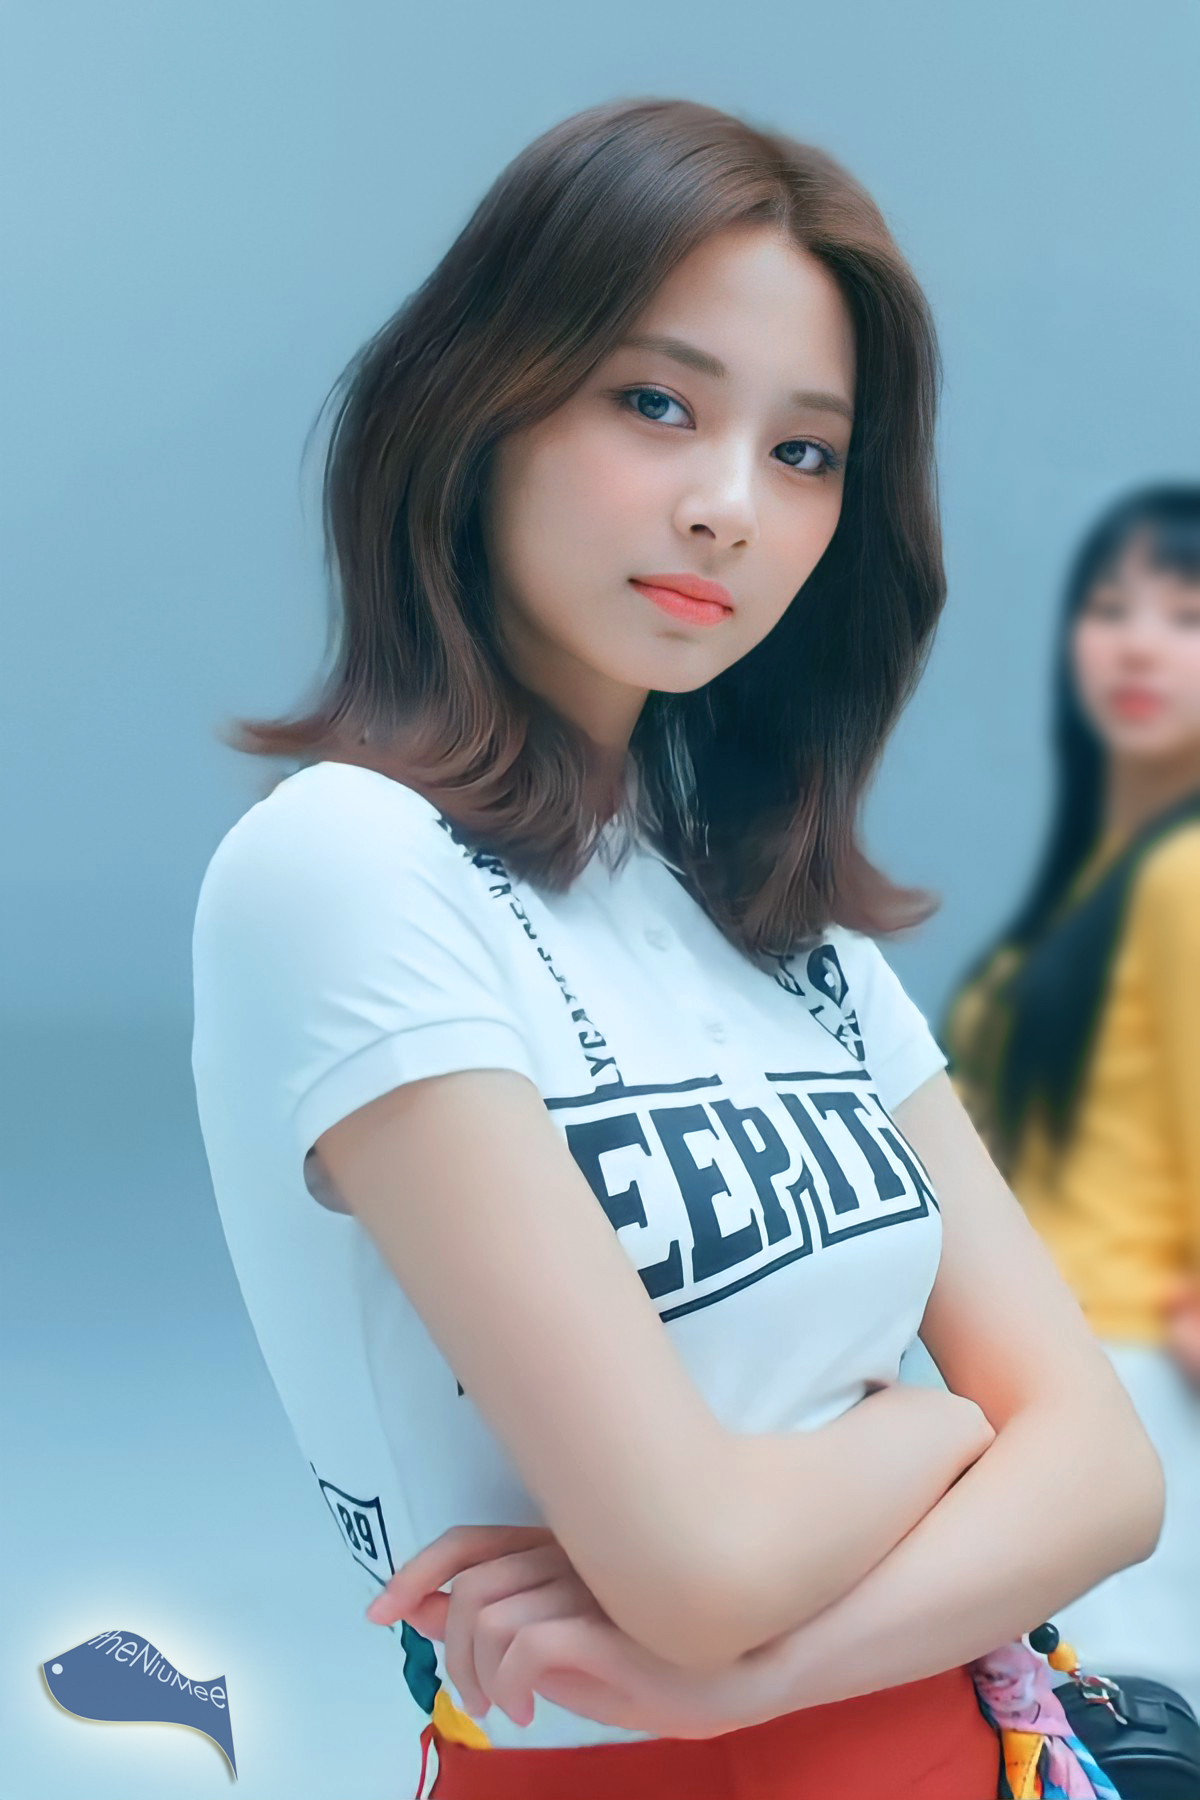 pearlygates-Tzuyu-Golf-White-Shirt-and-Red-Skirt-Side-Profile-Stare-at-you.jpg